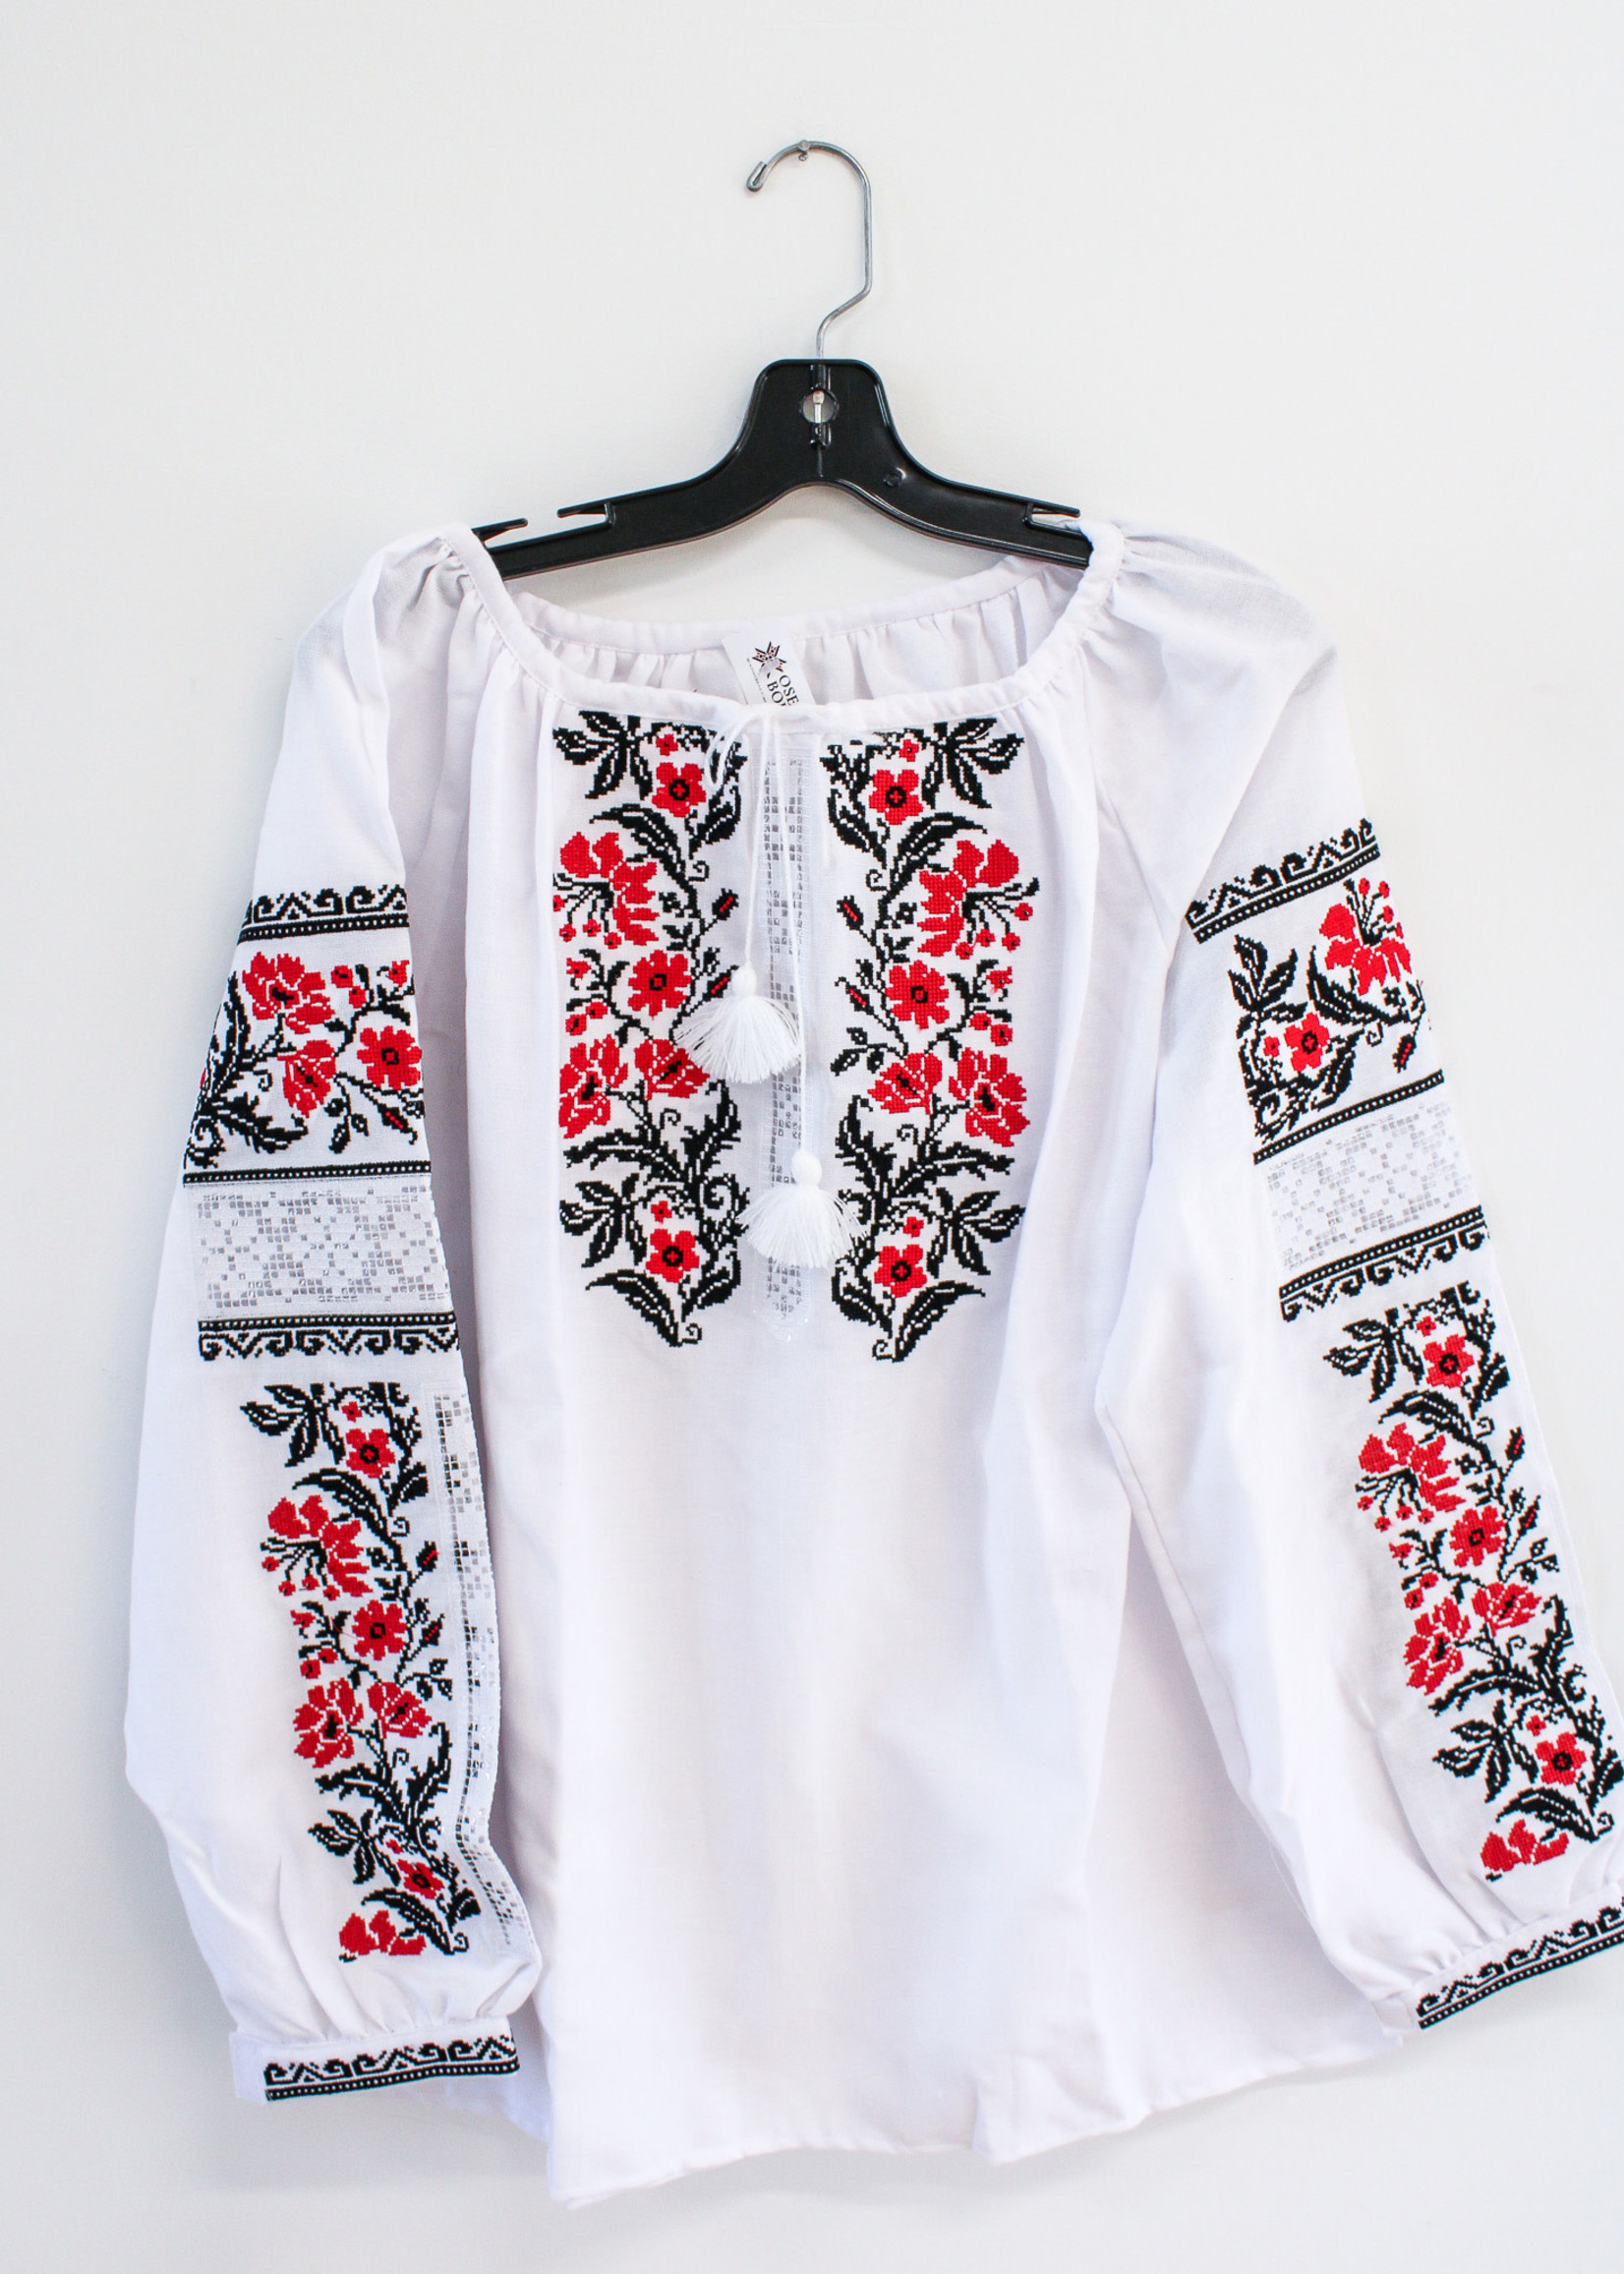 APPAREL - (W)Vyshyvanka White Lace/Red/Black Floral Embroidery + Embroidered Sleeves with tassel